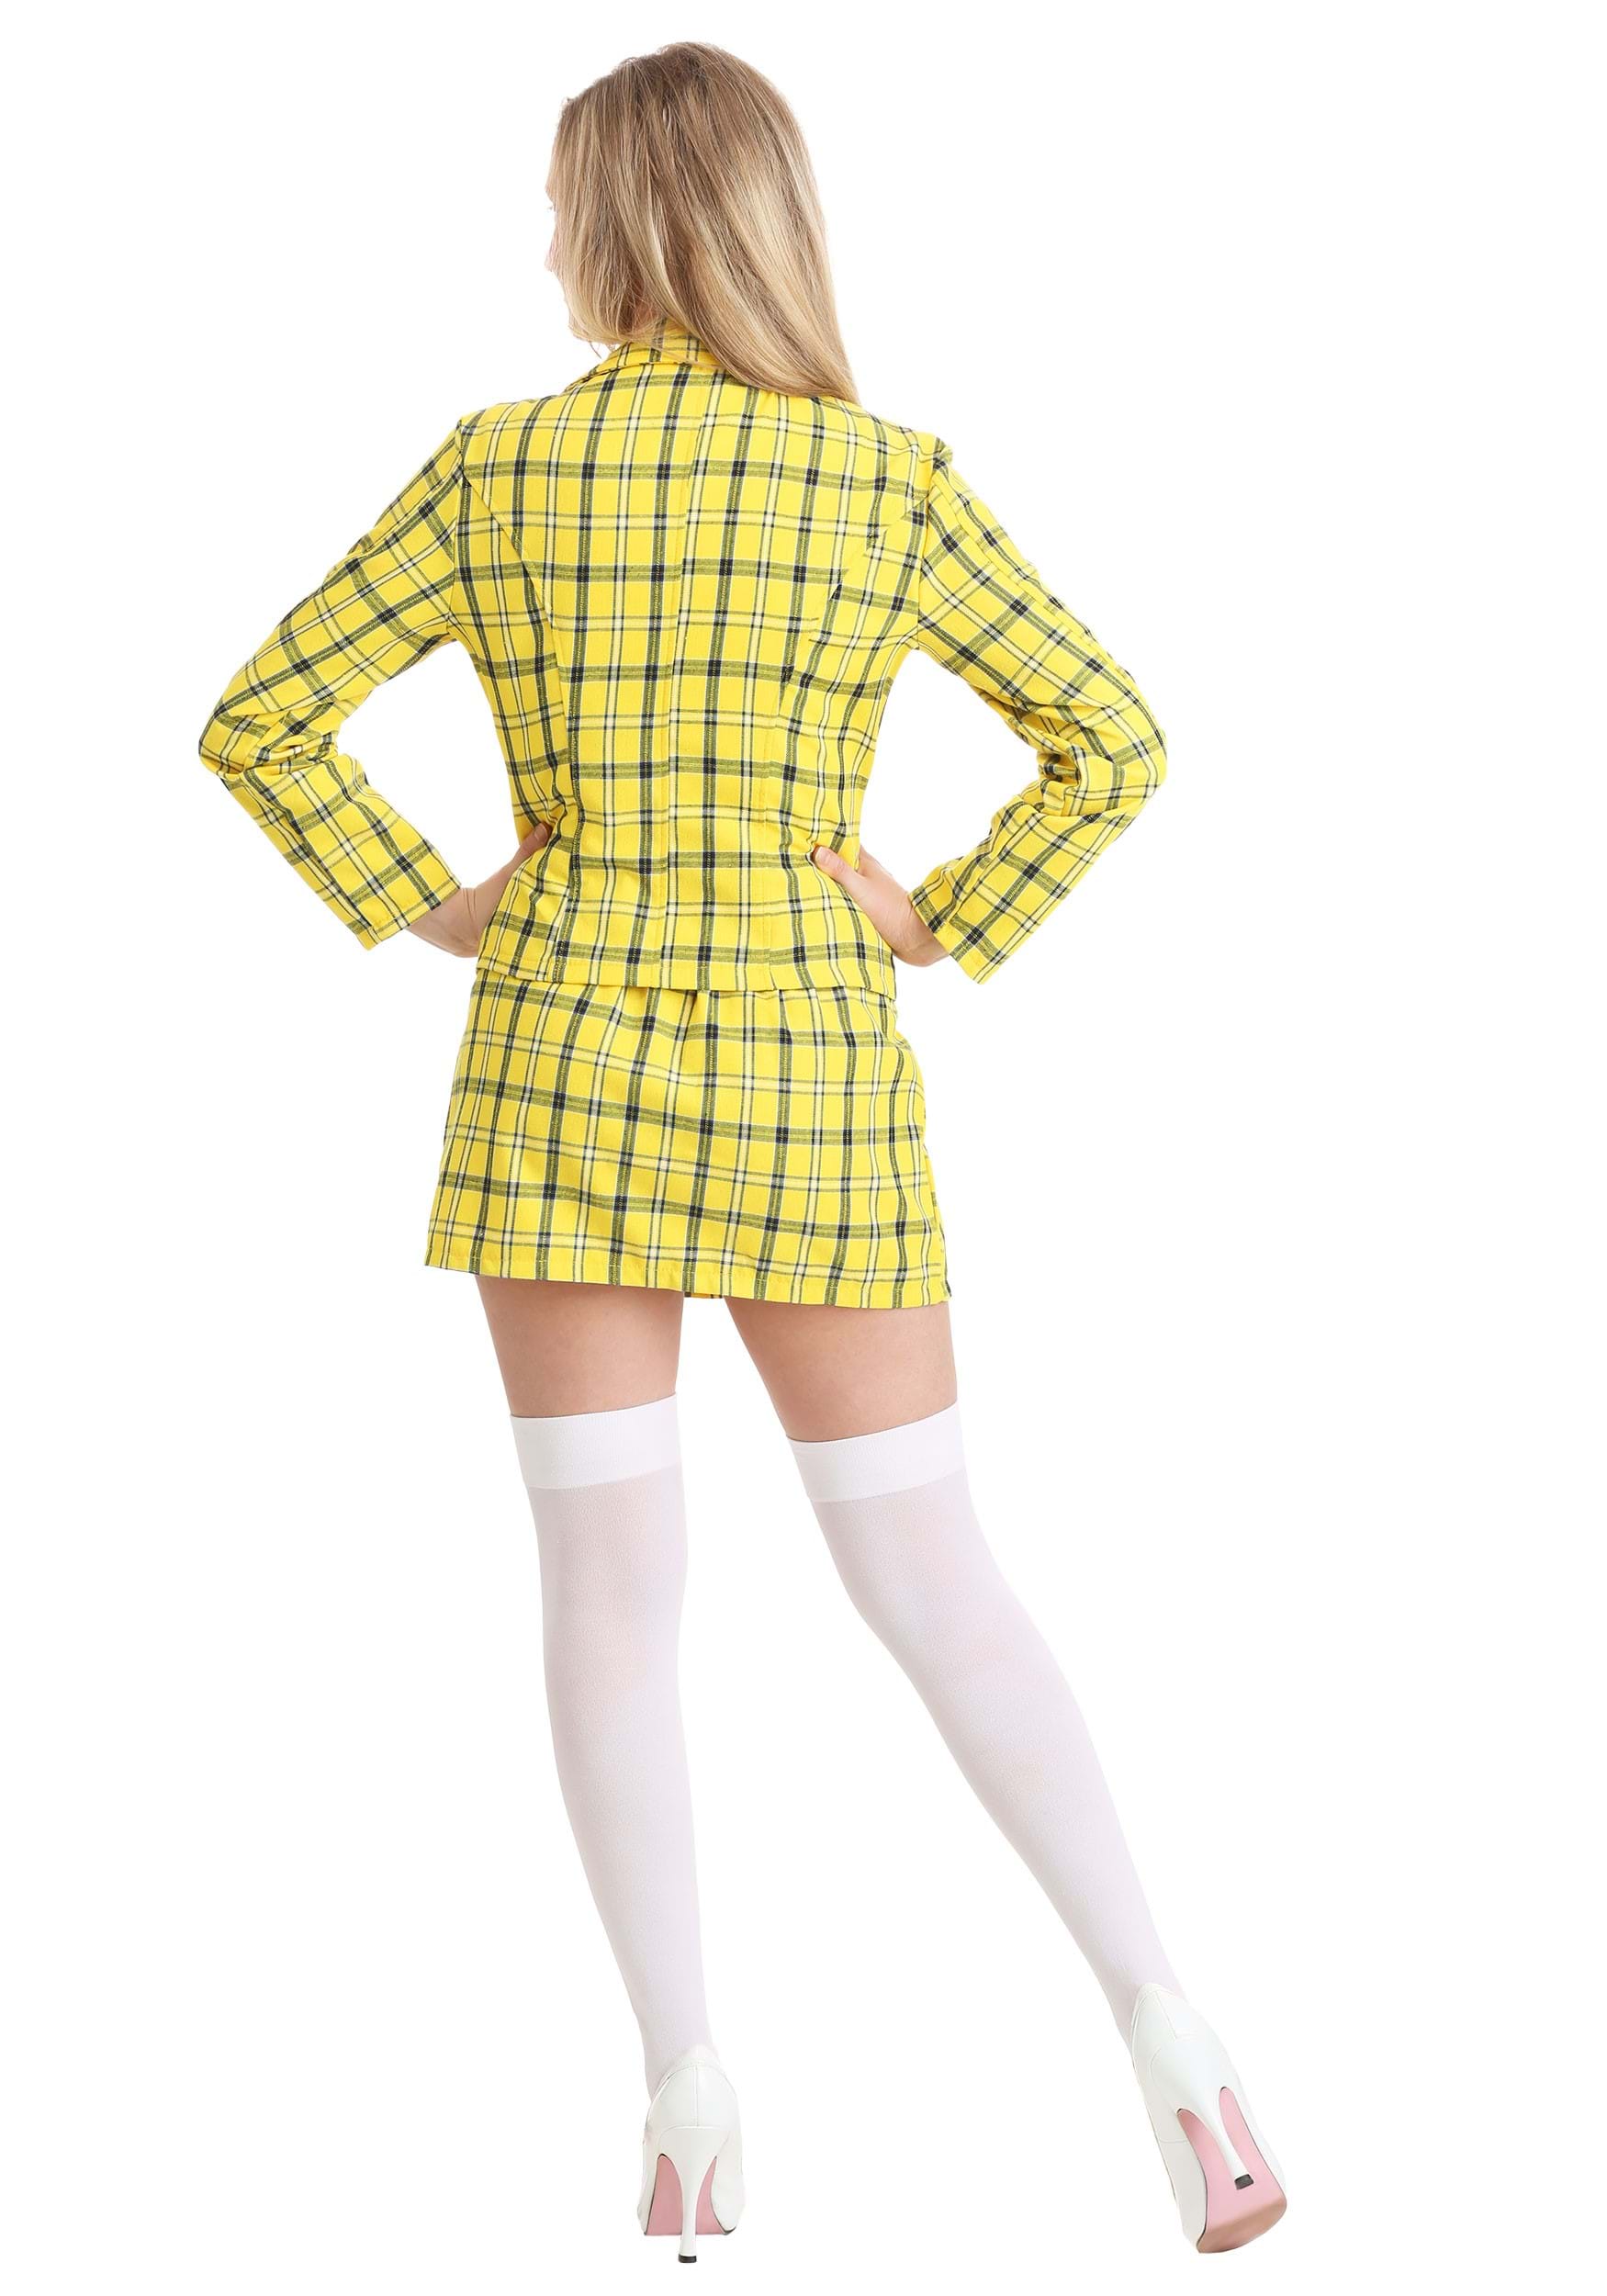 Clueless Cher Costume for Women | Exclusive | Made By Us